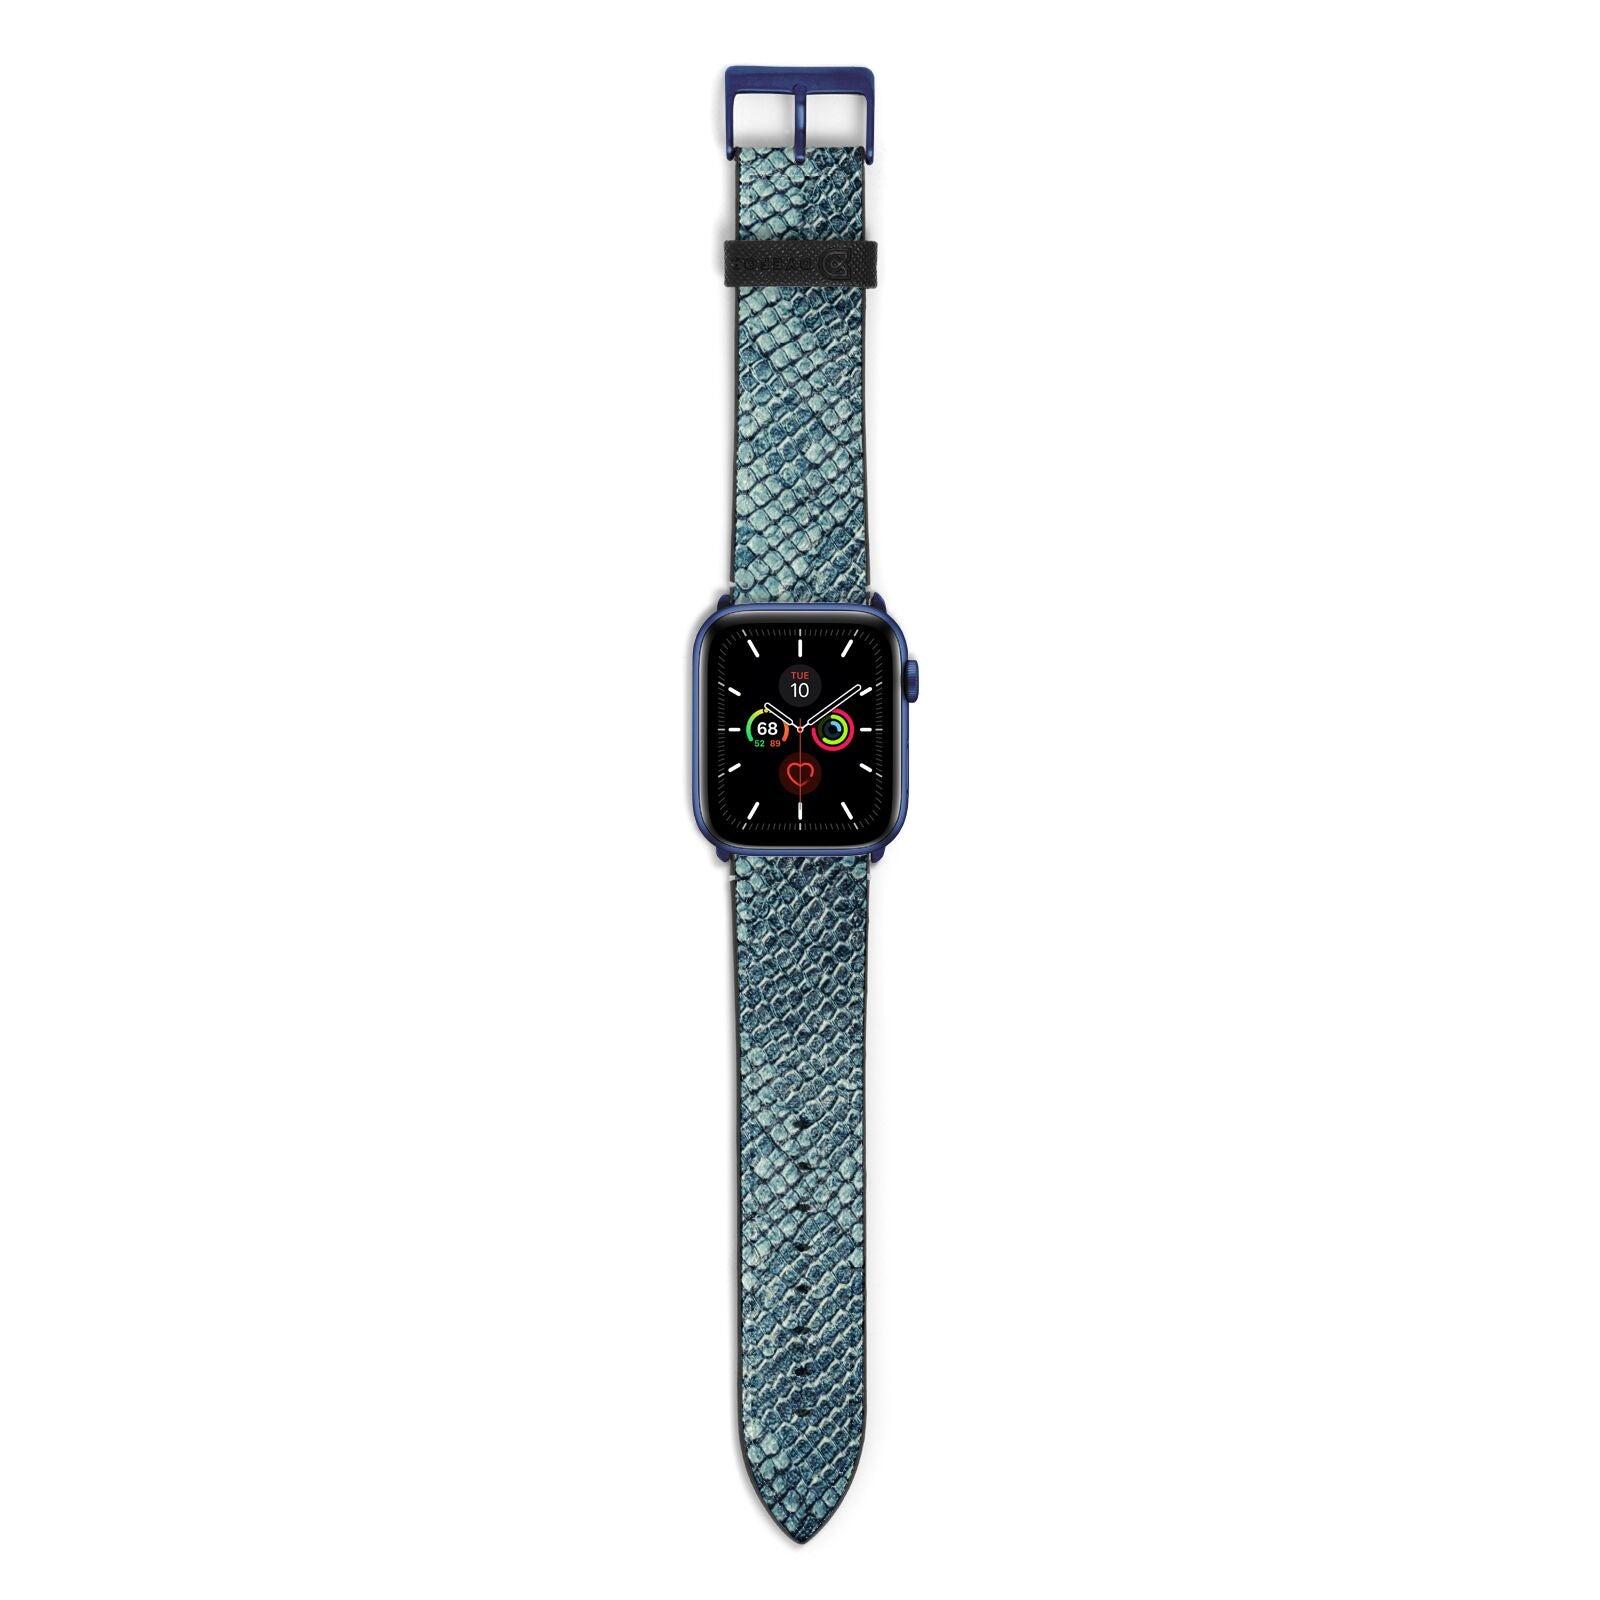 Teal Snakeskin Apple Watch Strap with Blue Hardware